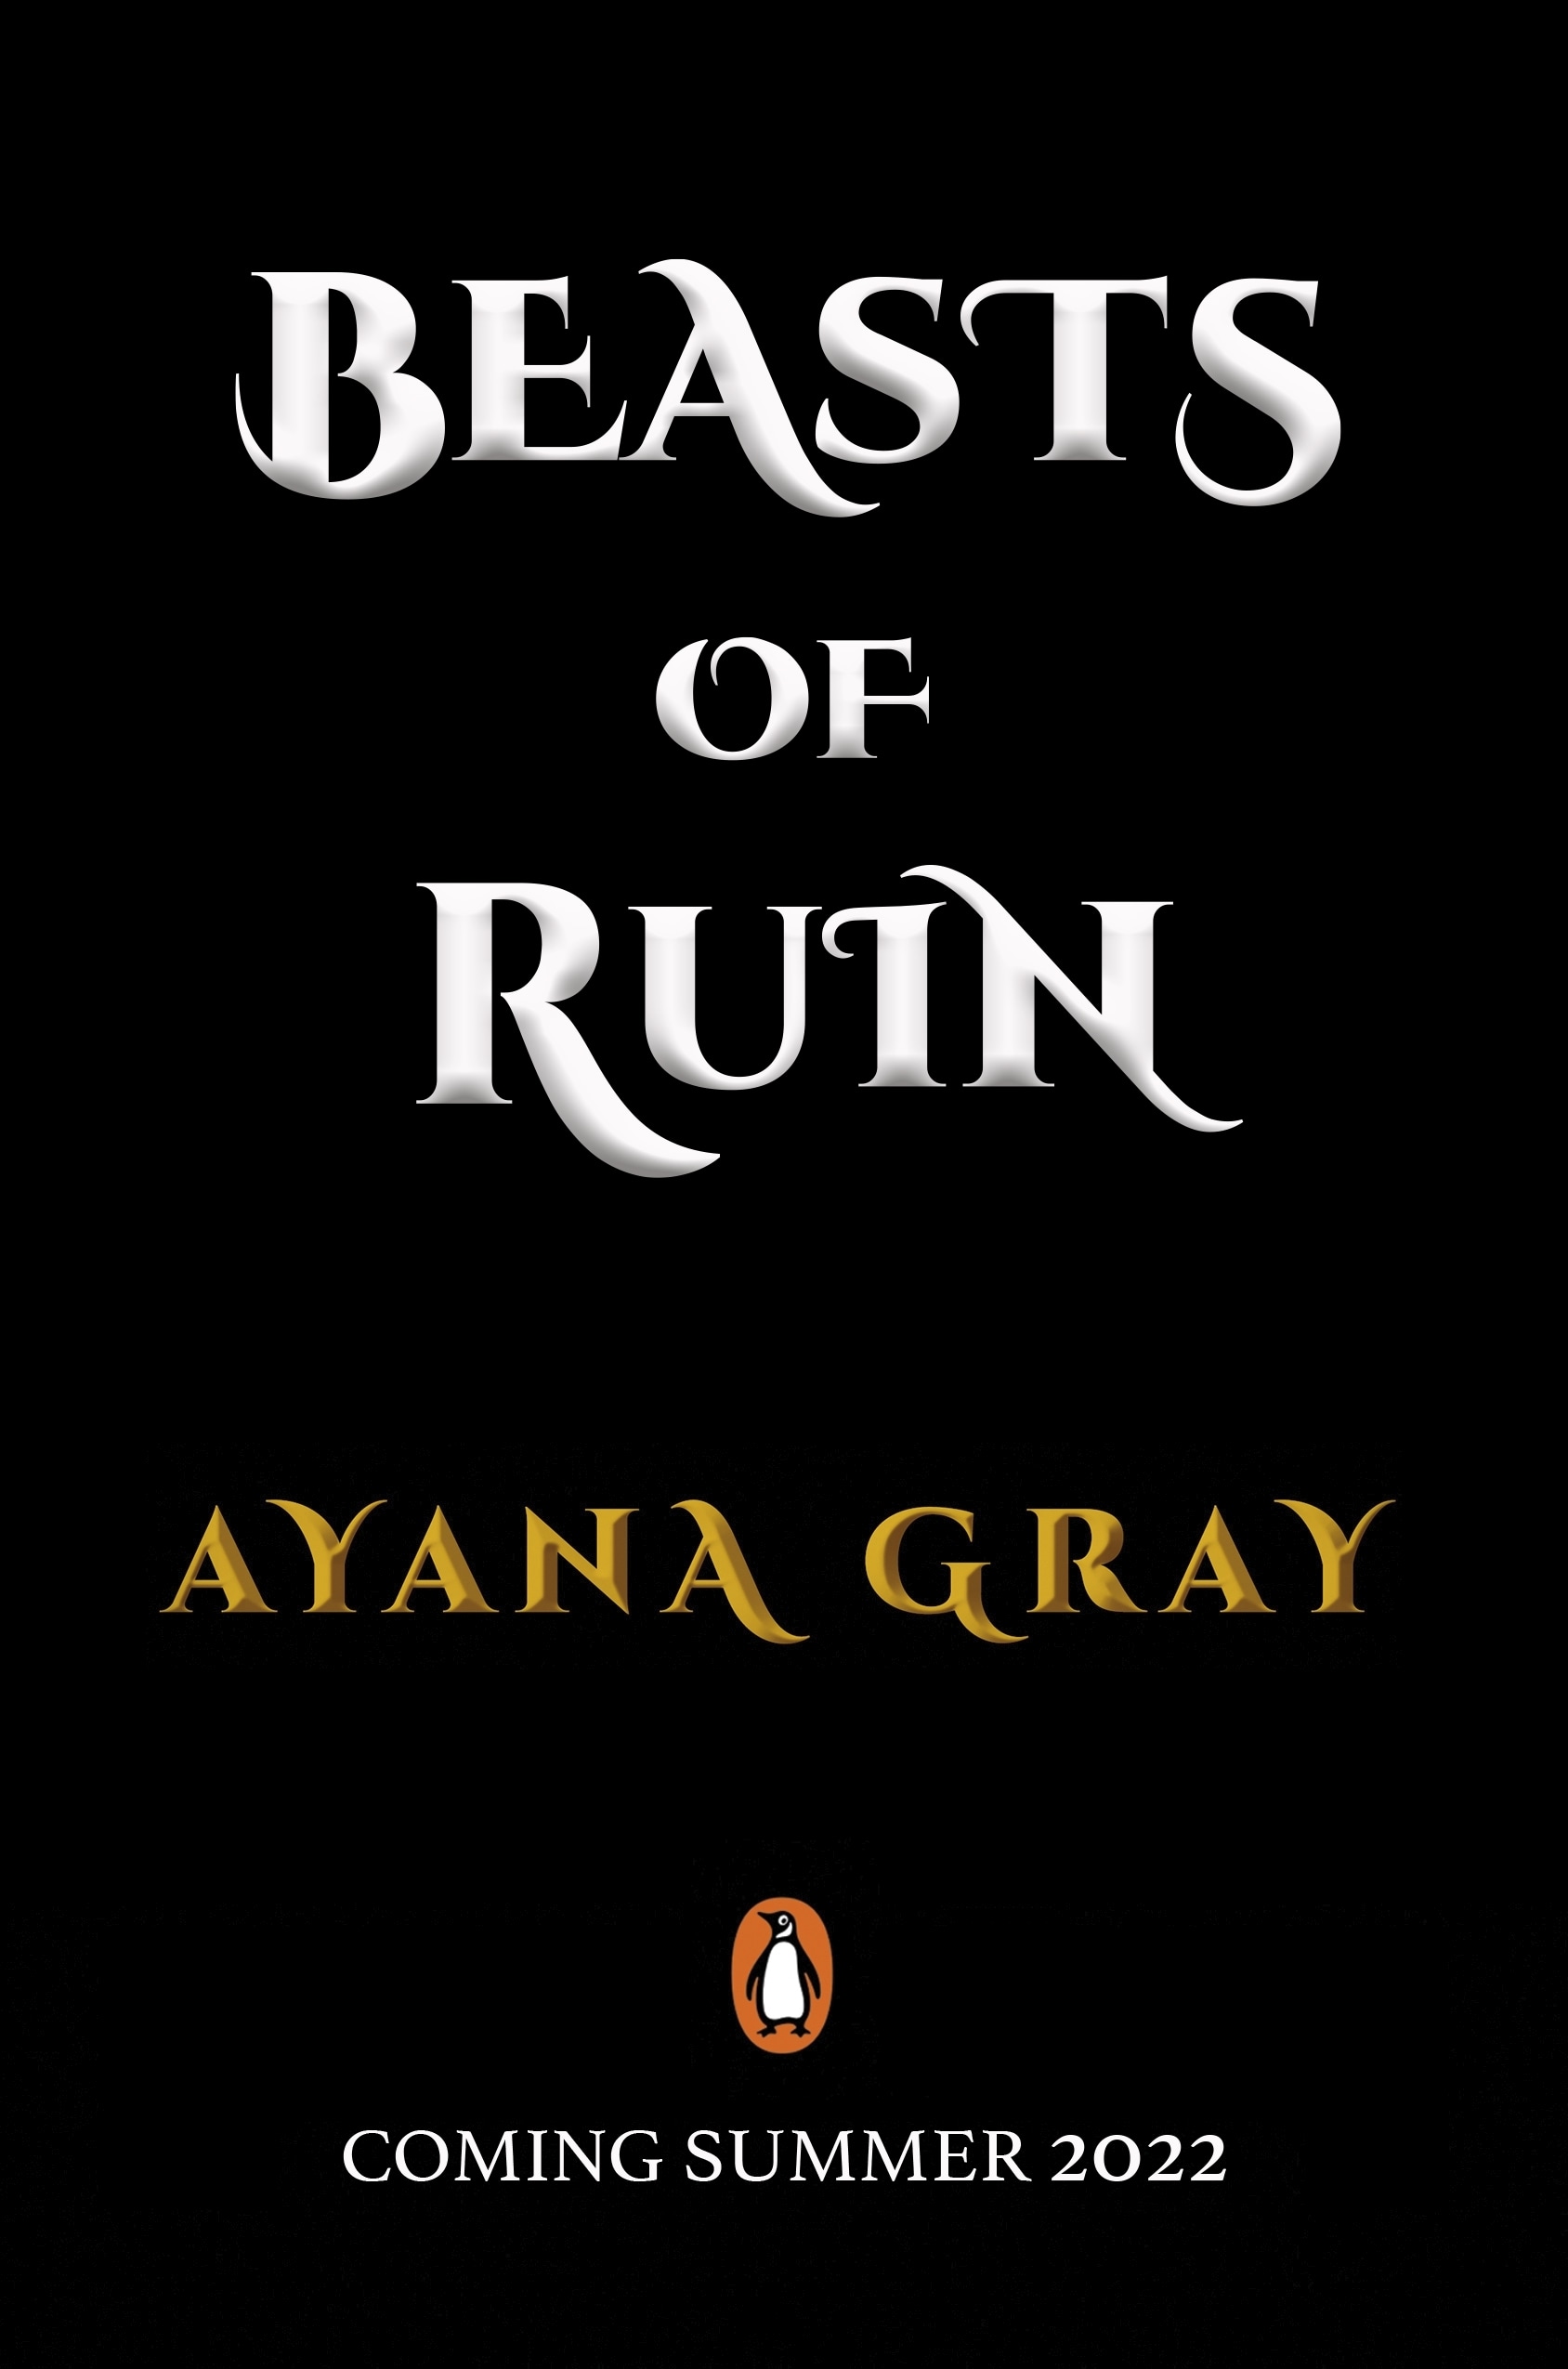 Book “Beasts of Ruin” by Ayana Gray — July 28, 2022